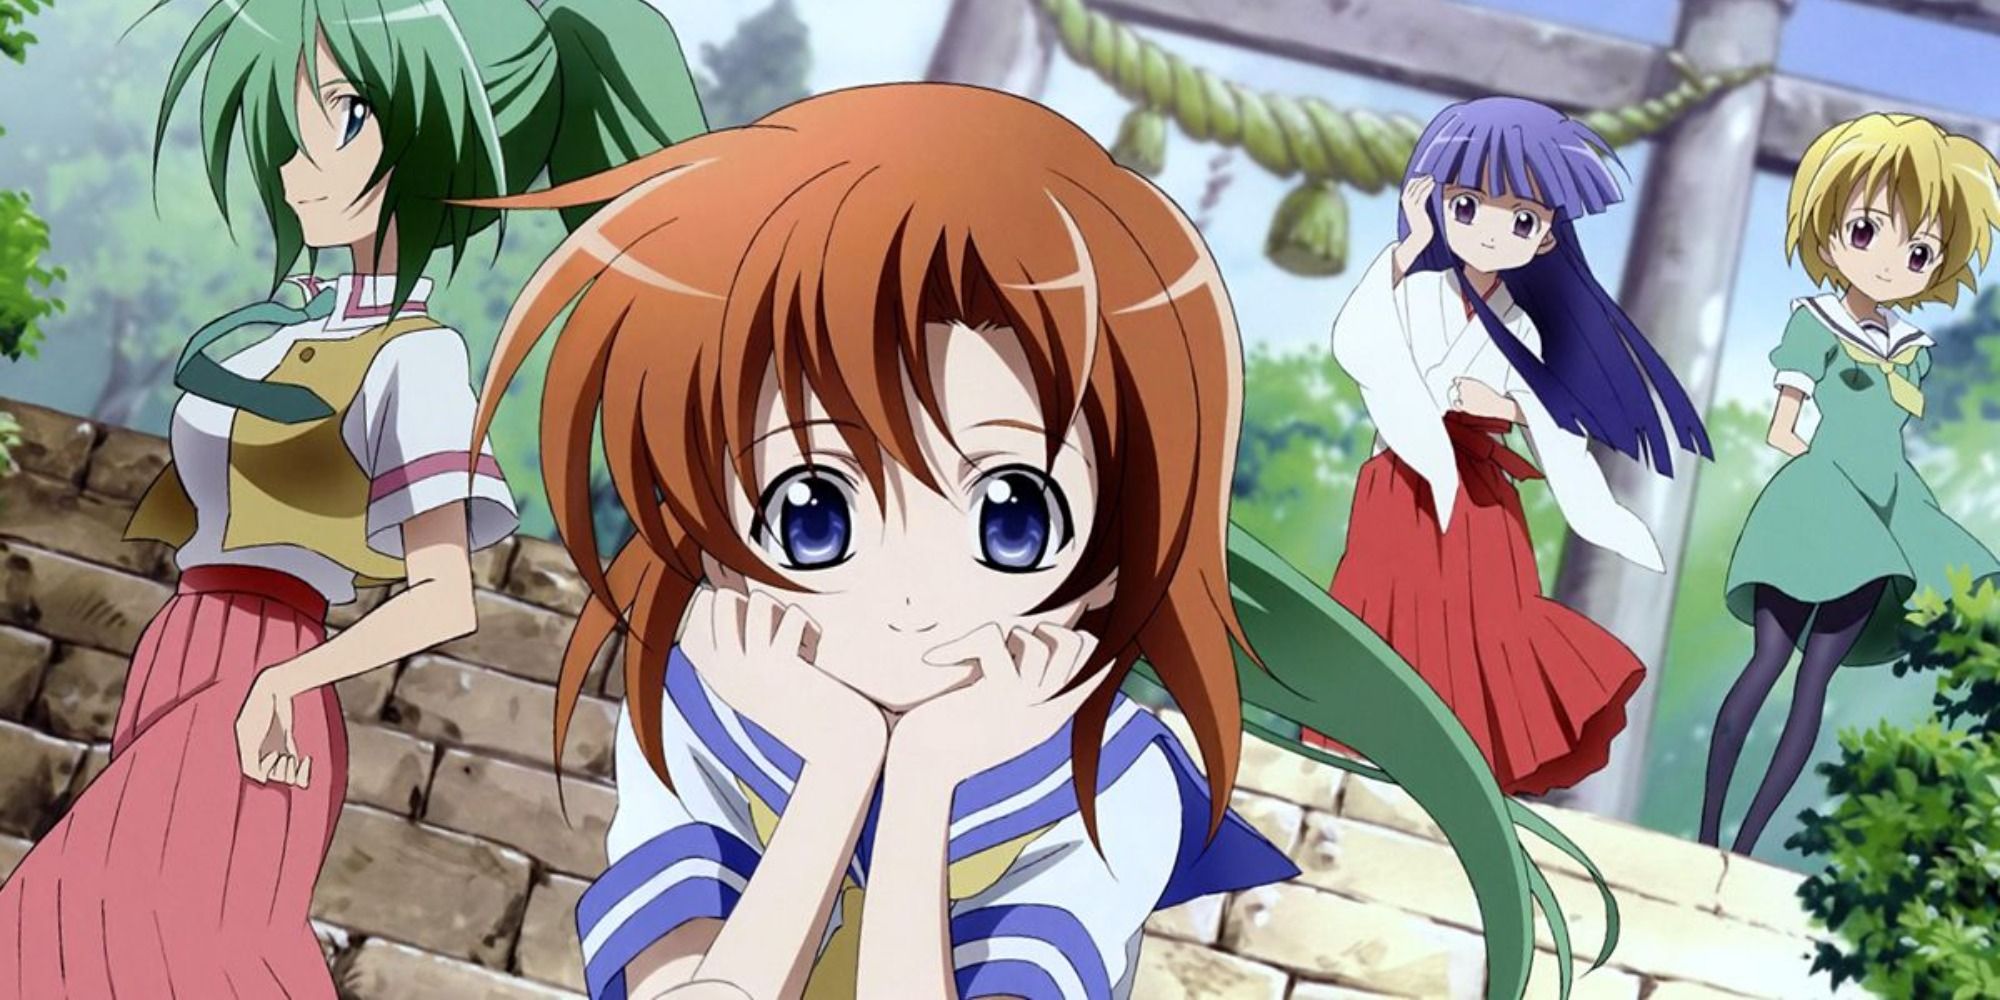 Promotional image of the cast of Higurashi: When They Cry